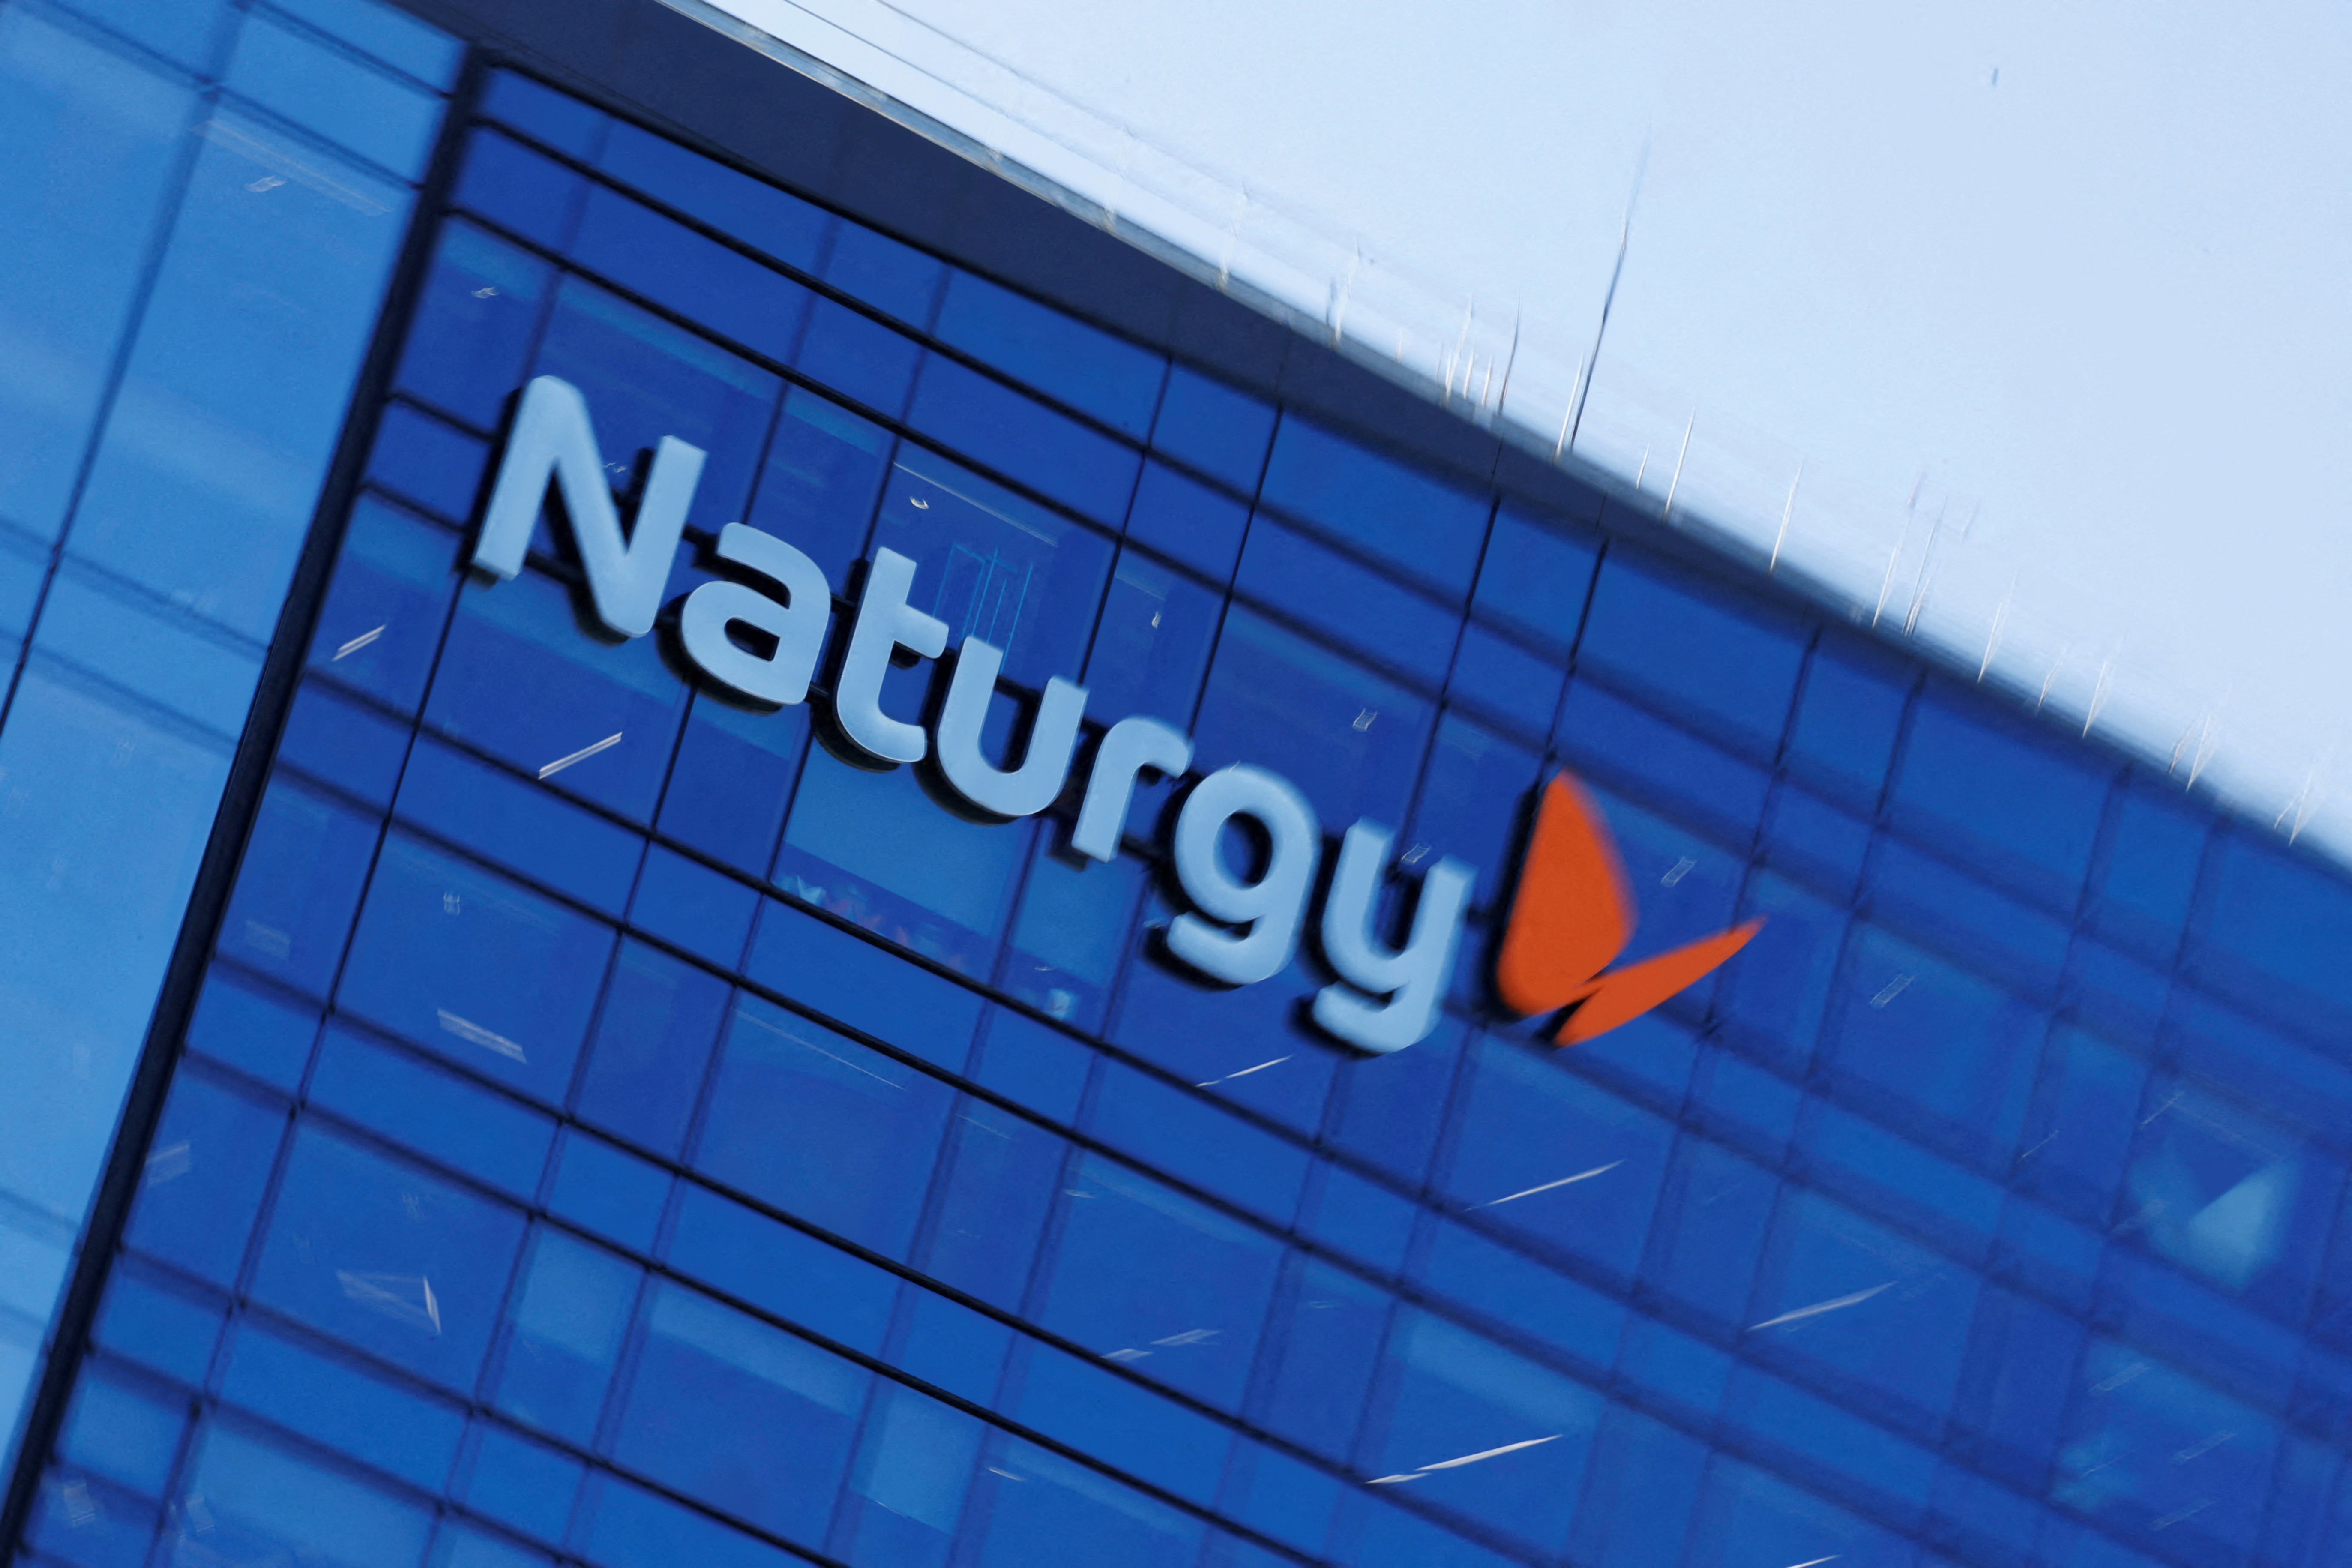 The logo of Spanish energy company "Naturgy" is seen in its headquarters in Madrid